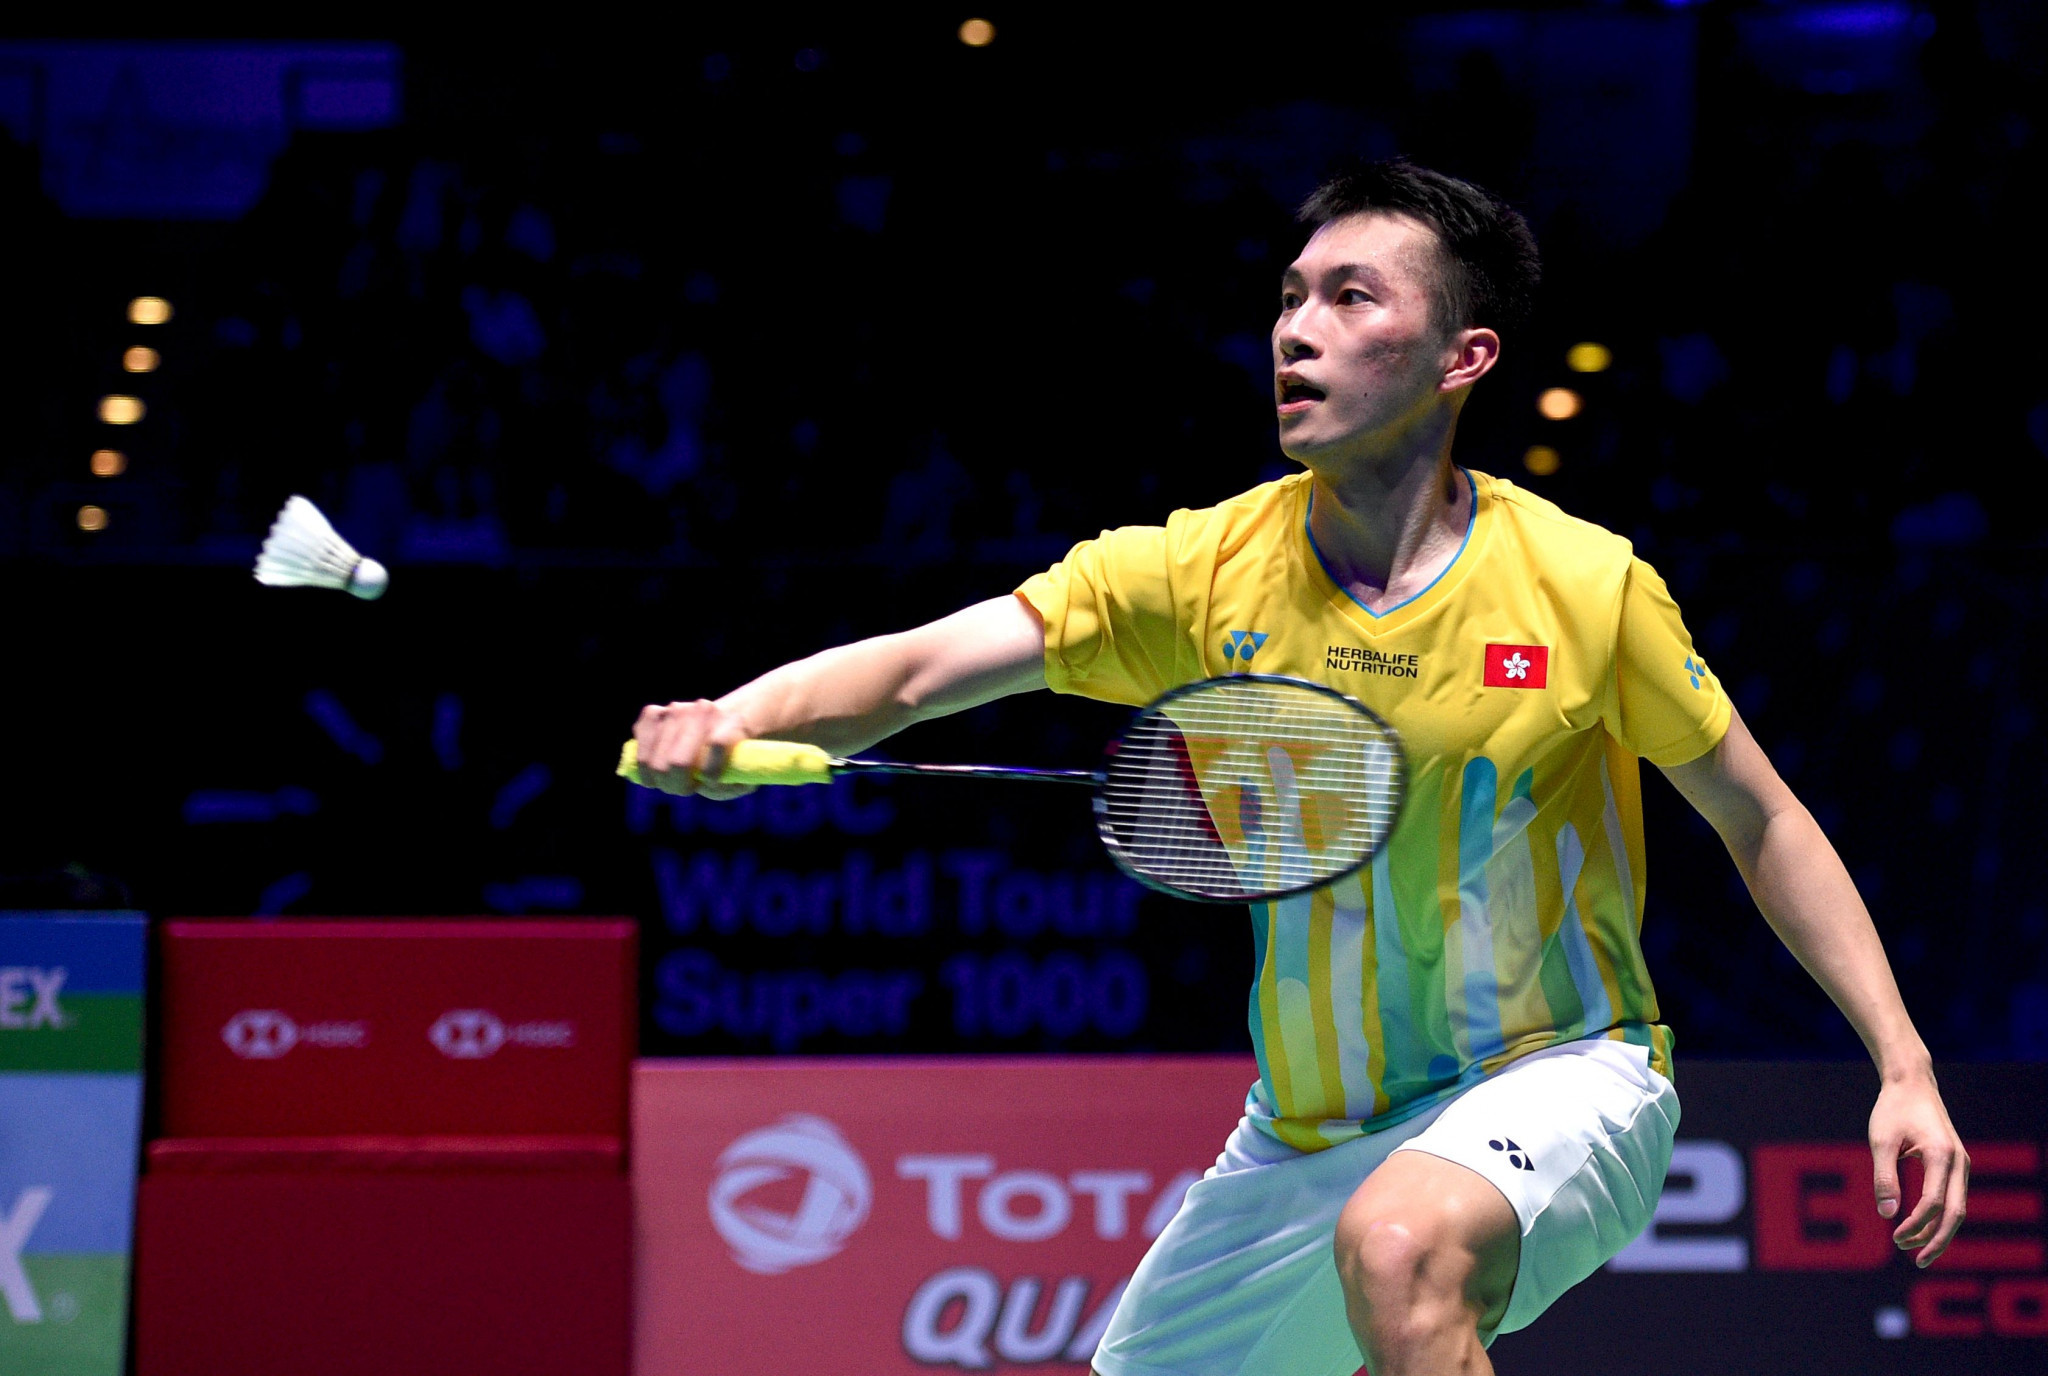 Double Olympic champion Lin and top seed Yamaguchi fall at BWF New Zealand Open